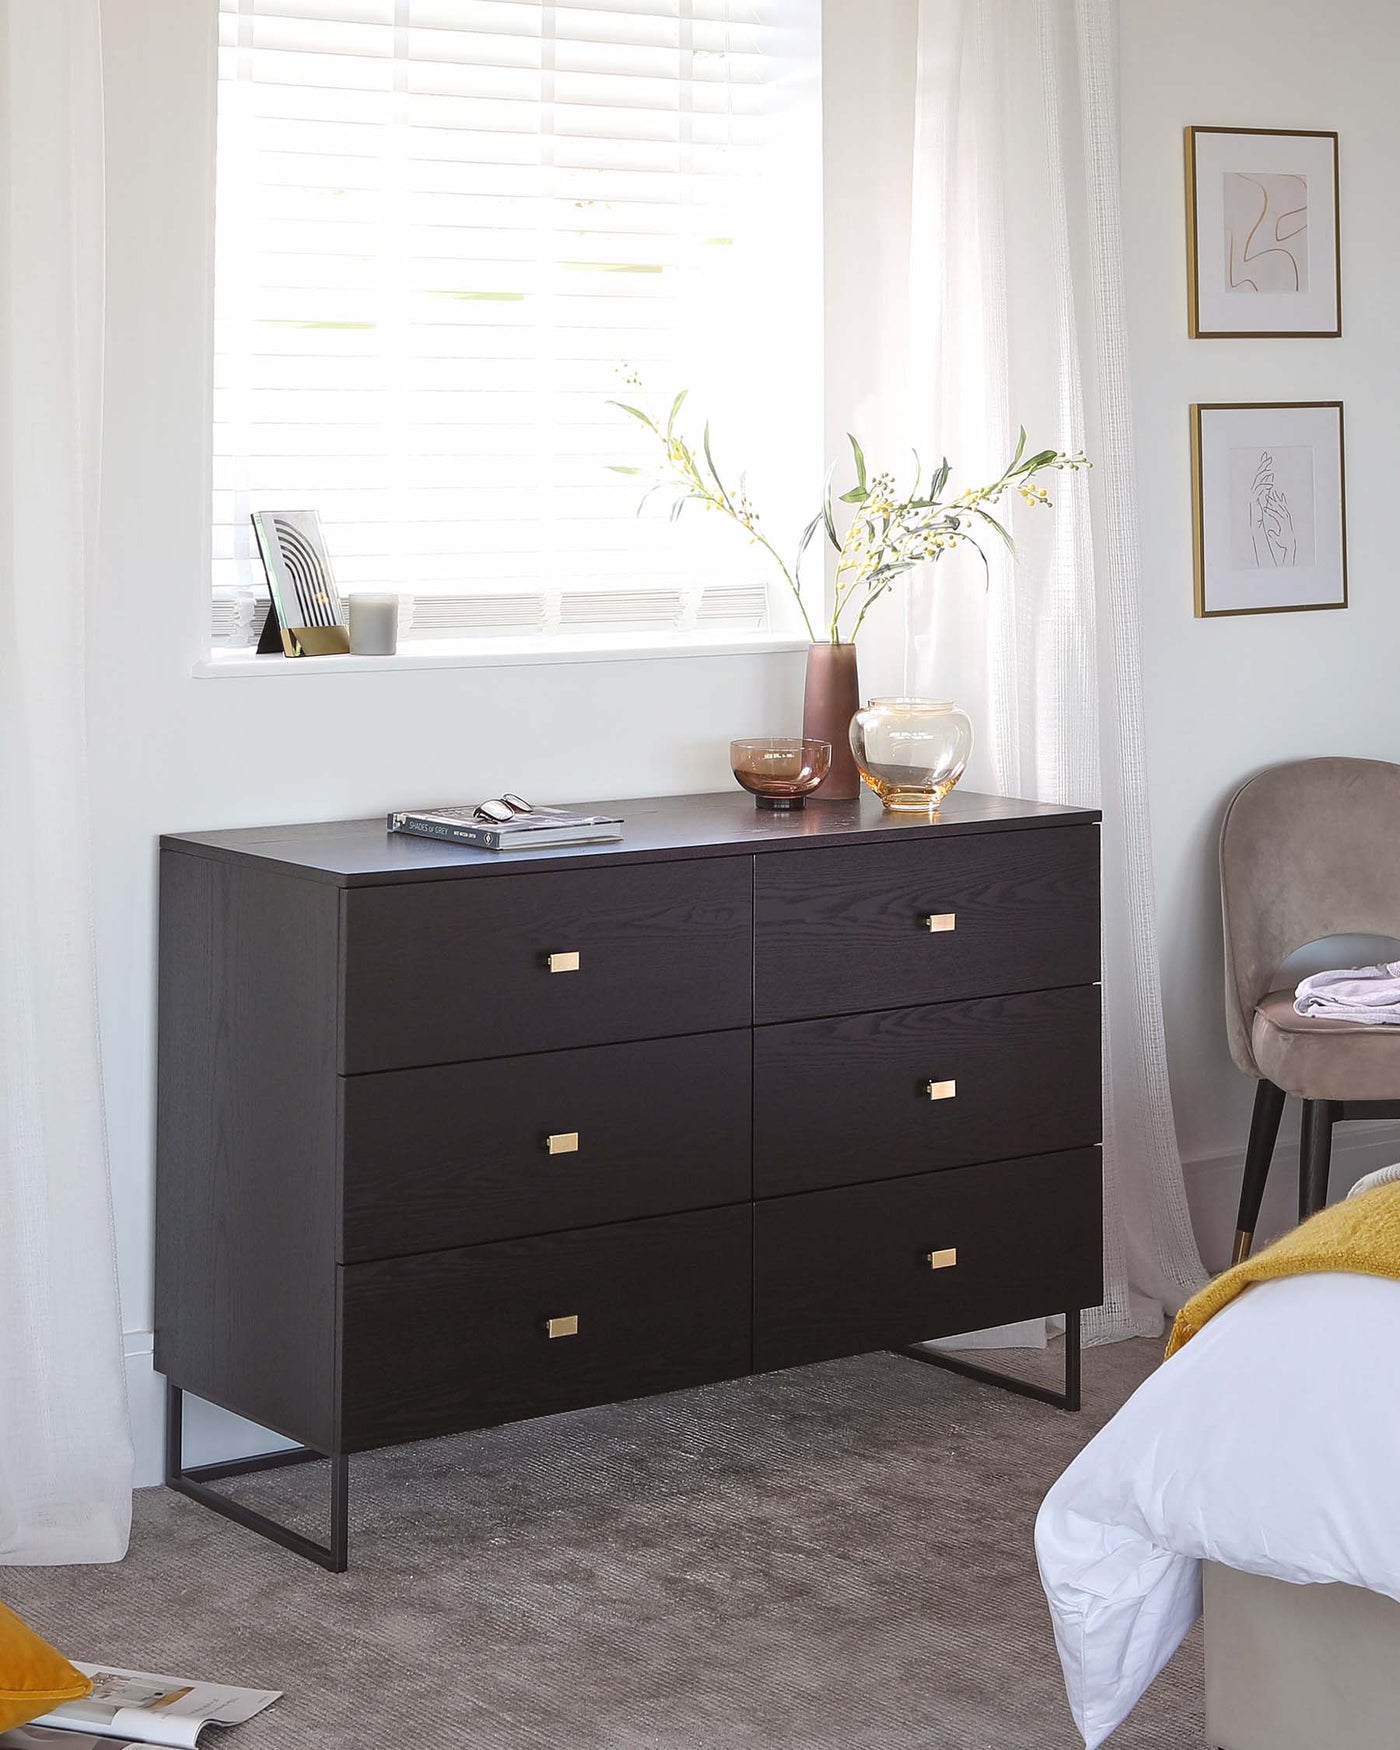 Modern black wooden dresser with six drawers featuring brass rectangular handles, standing on sleek metal legs. There are decorative items on top, including vases and books, complemented by a framed artwork on the wall above. A grey upholstered chair is partially visible to the right.